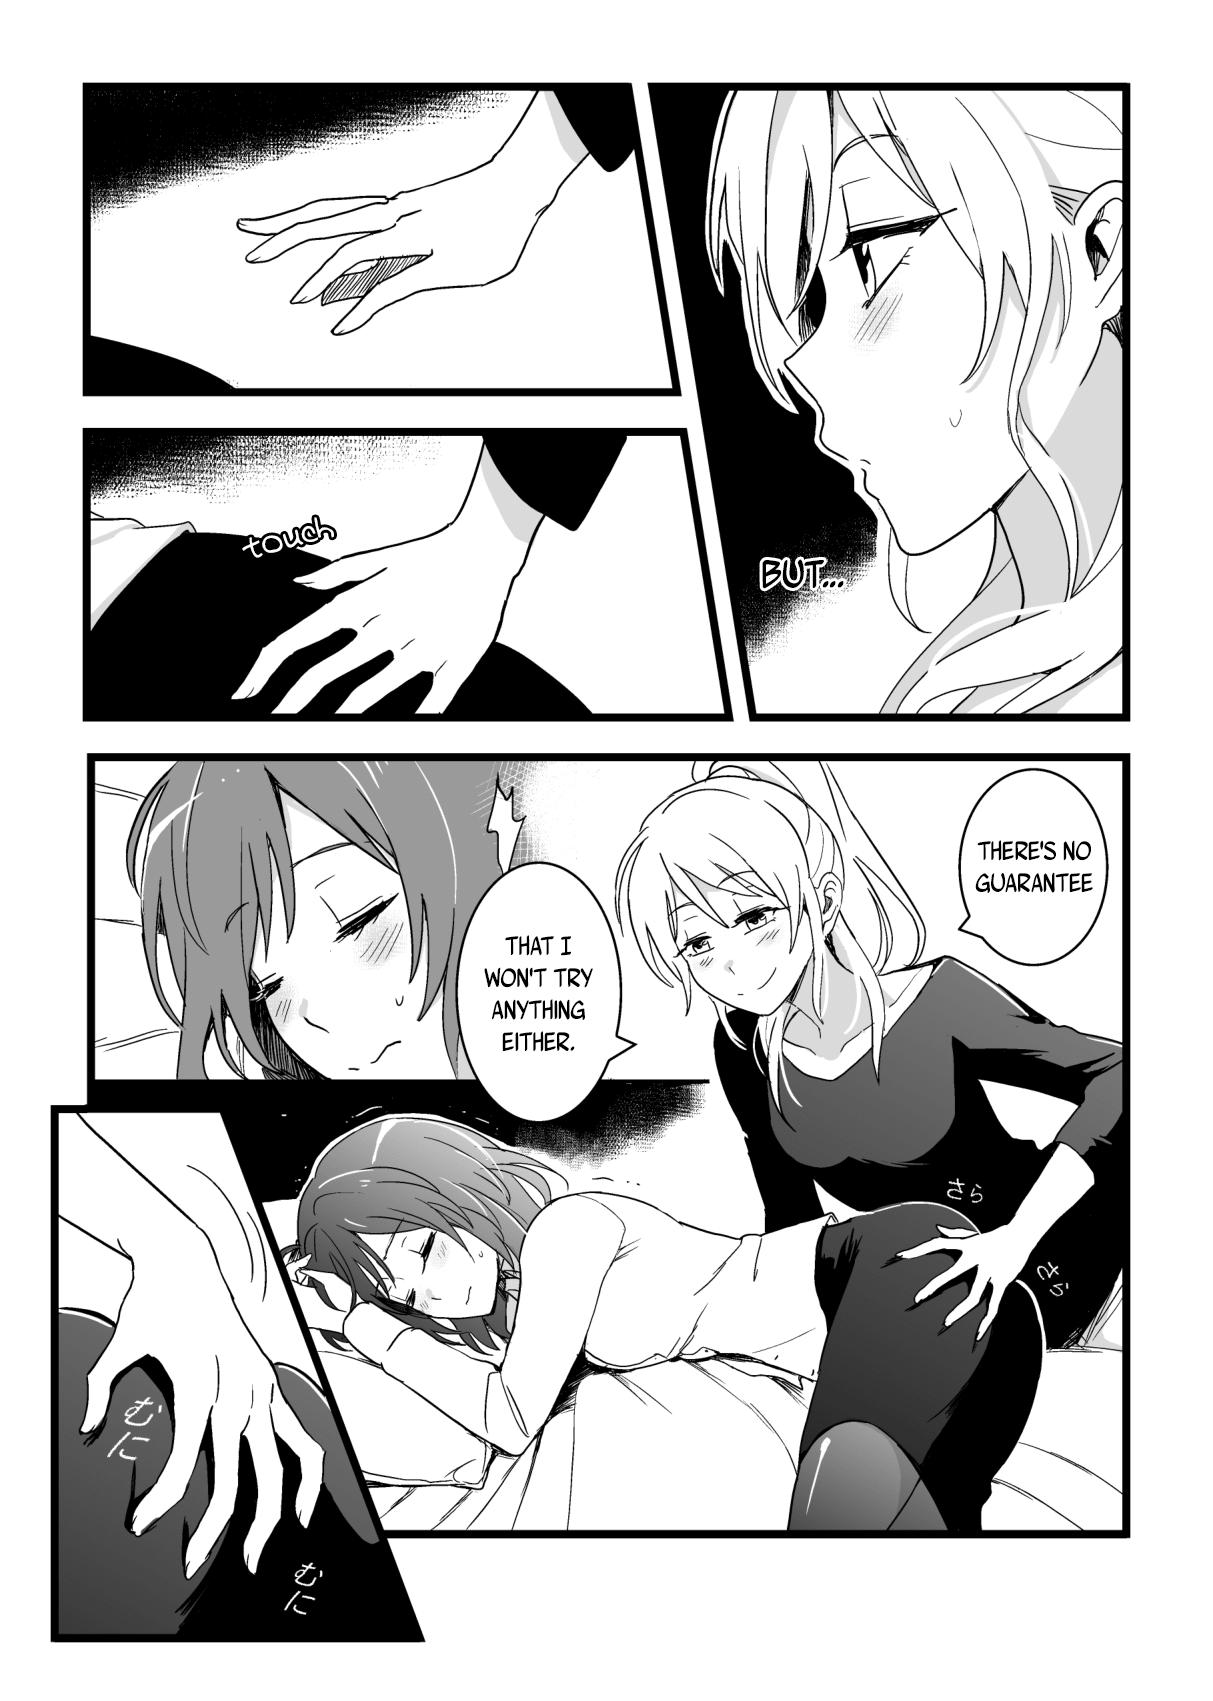 Urine Kaito Carnival Night - Love live Thuylinh - Page 5